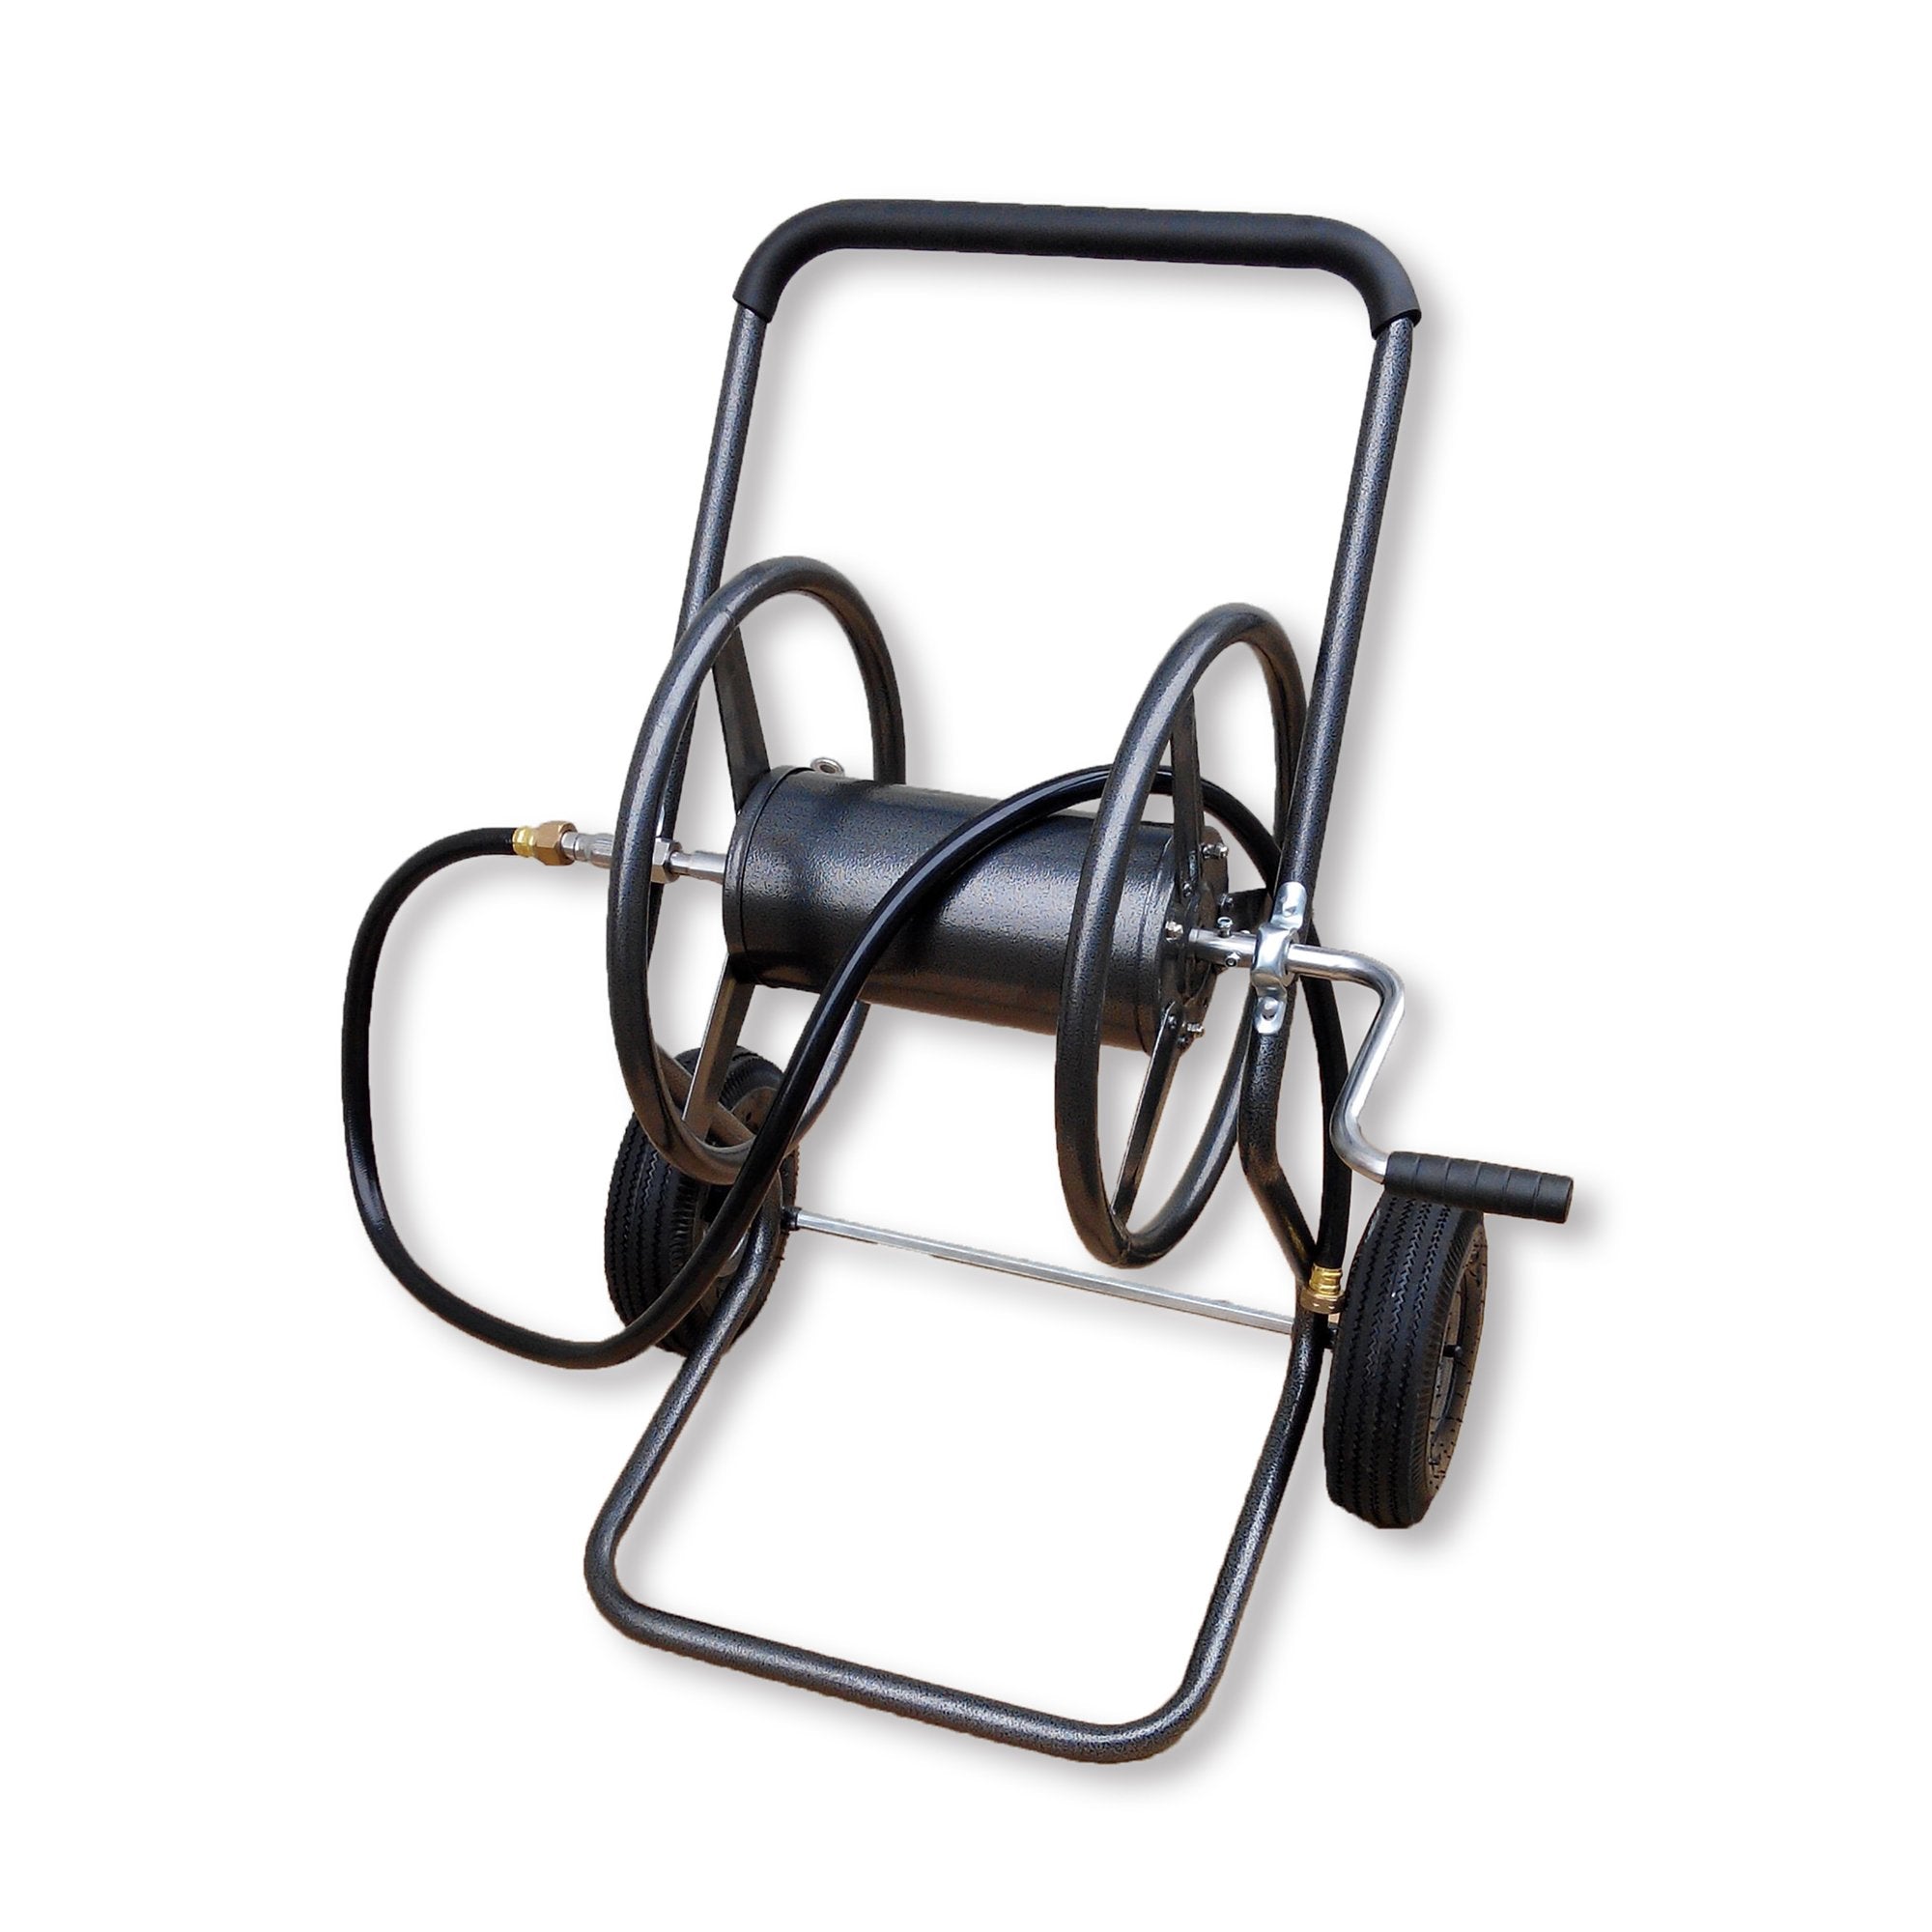 Replacement parts for 2 Wheel Hose Reel Cart model 913641 – Backyard  Expressions